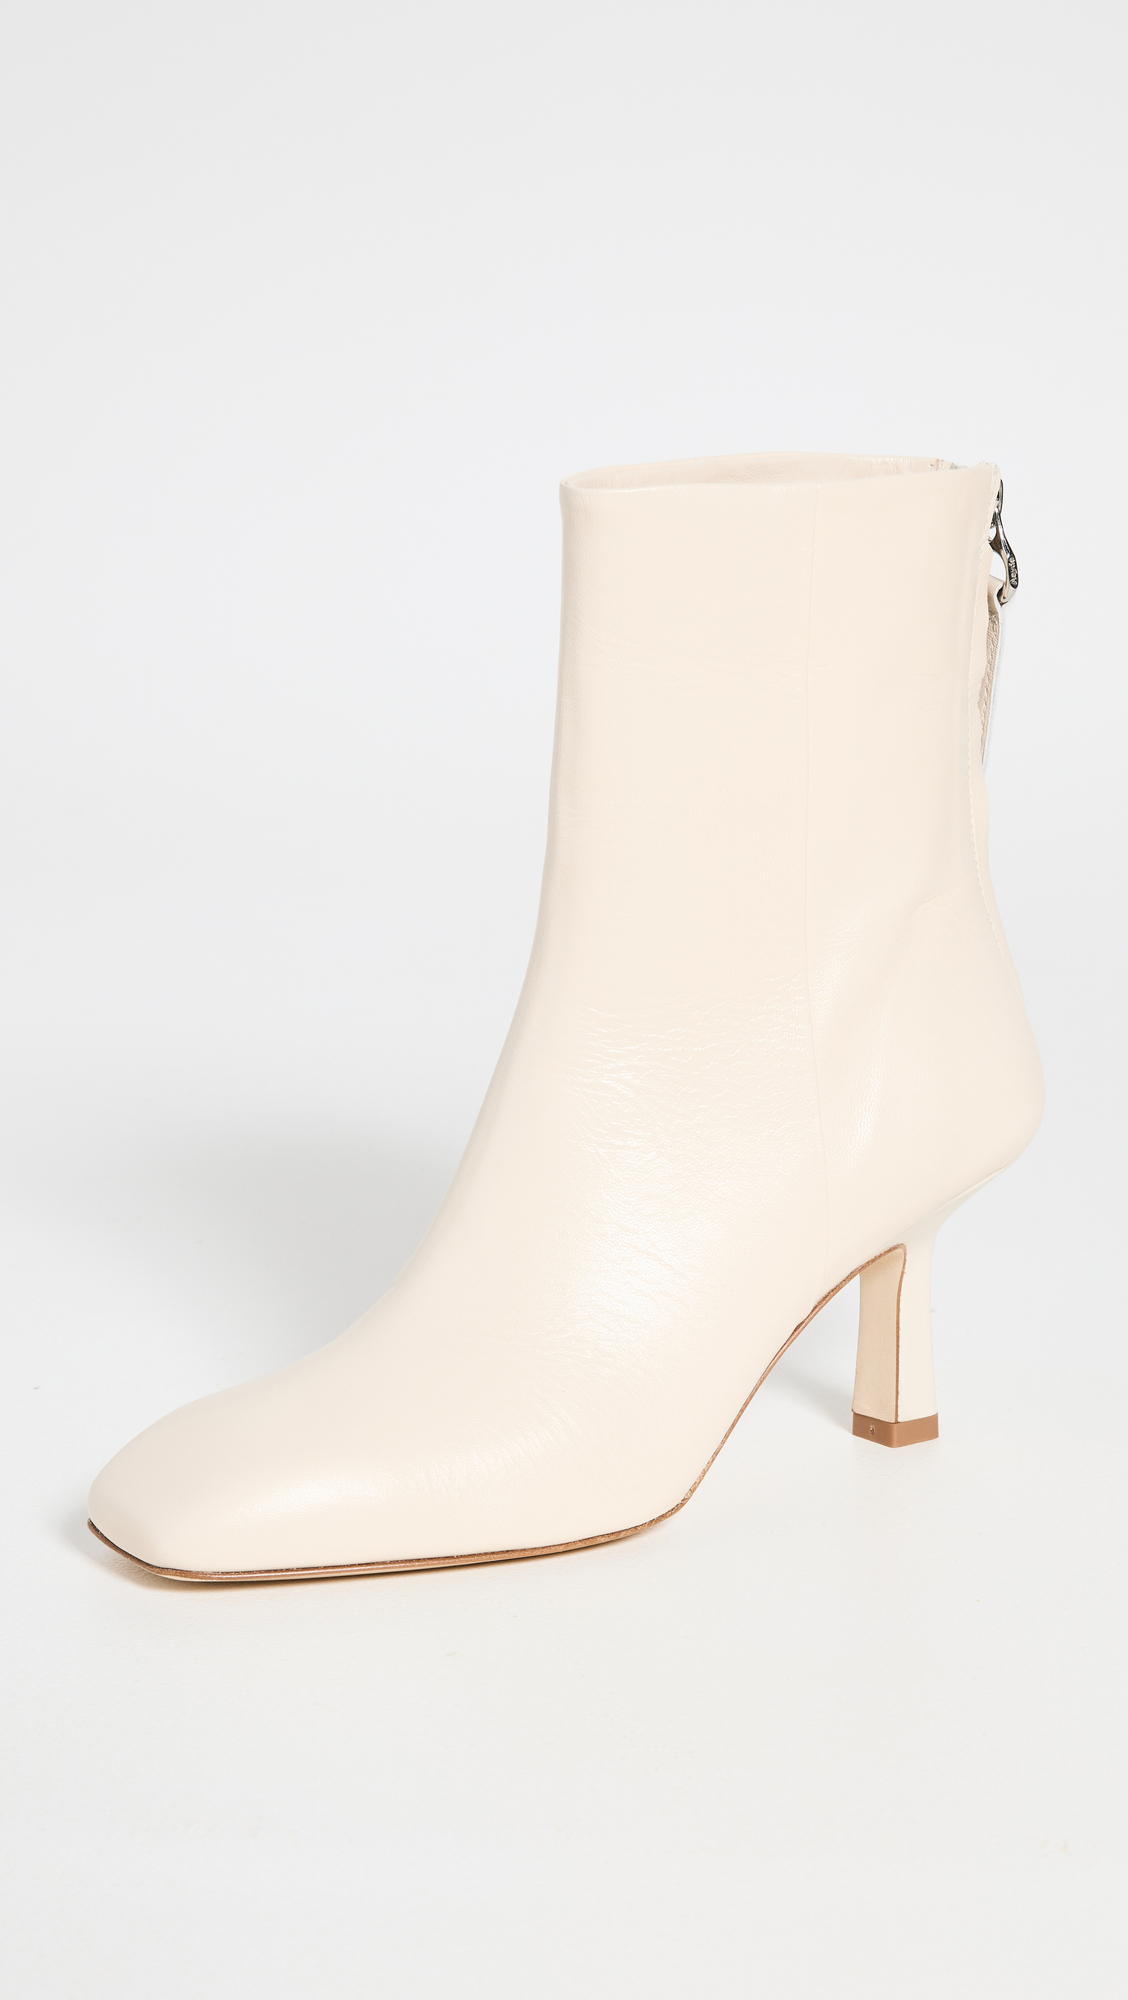 9 Stylish White-Boot Outfits to Wear Year-Round | Who What Wear